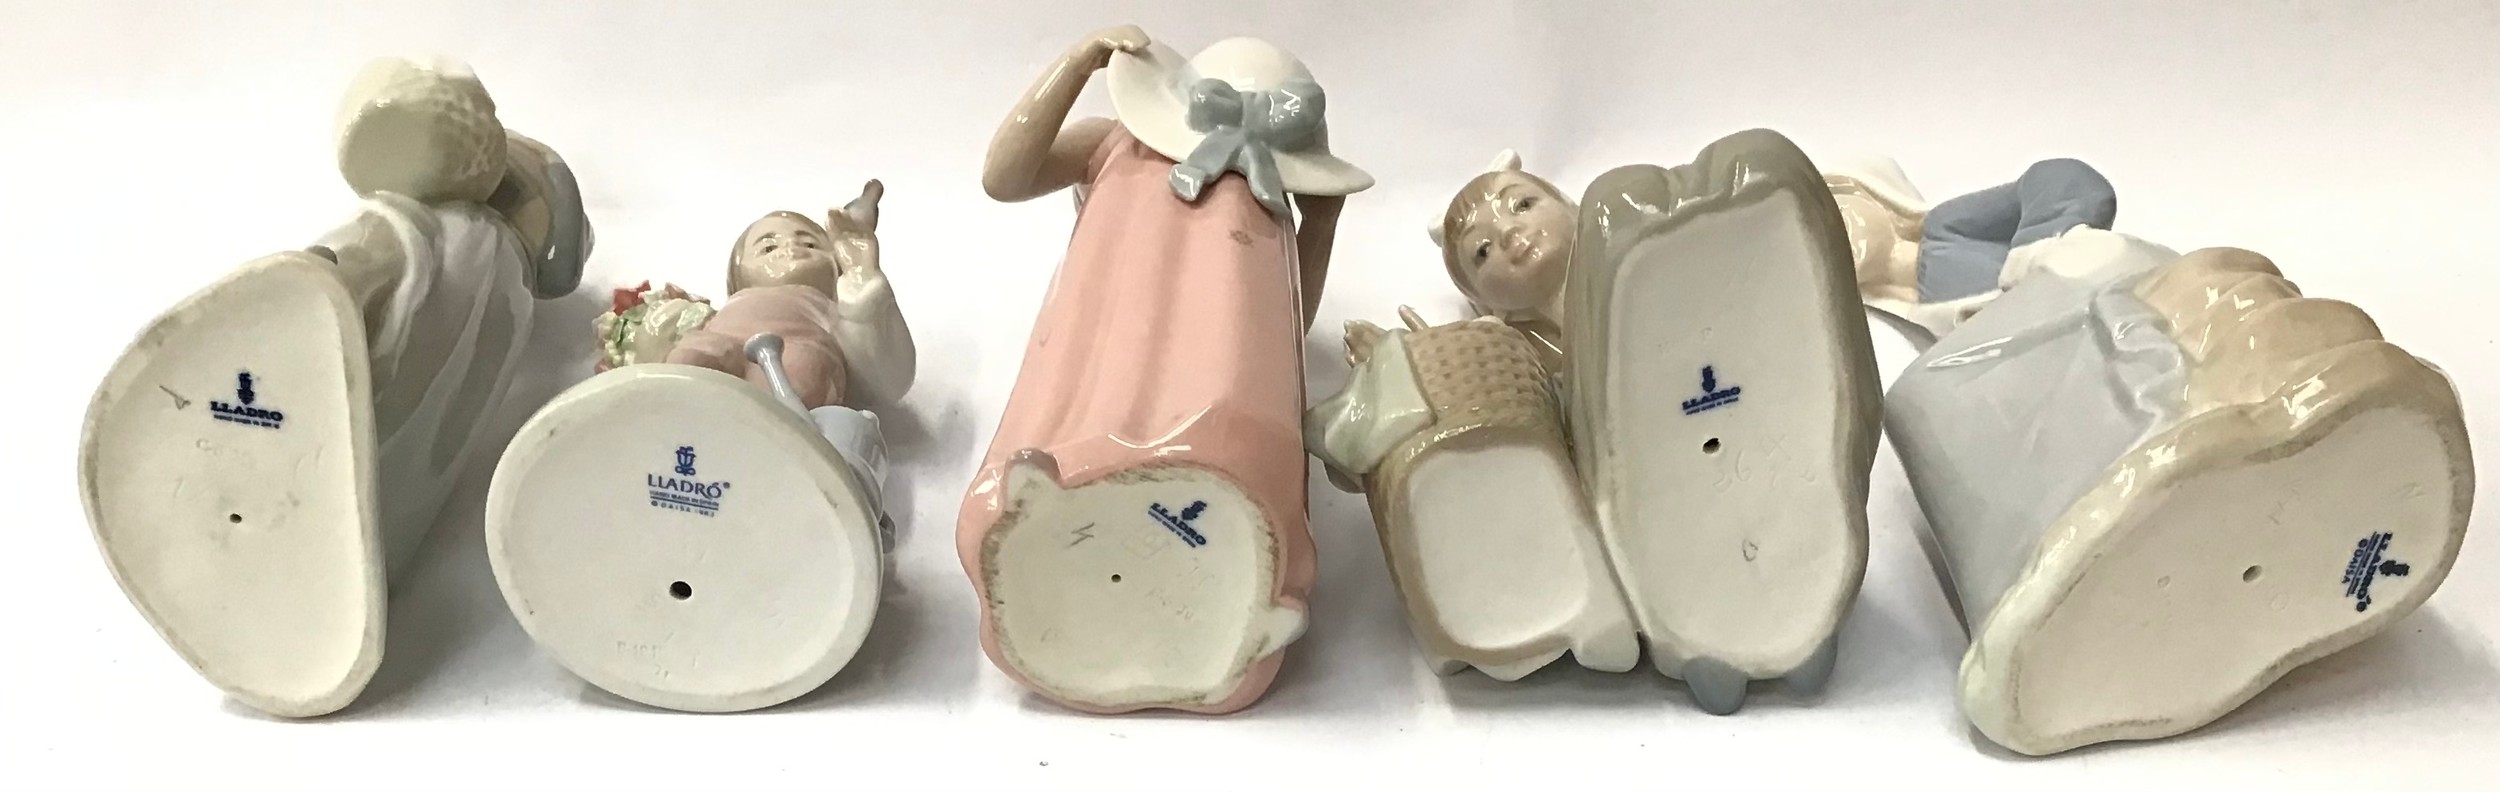 Lladro figures x 5 (unboxed) - Image 3 of 3